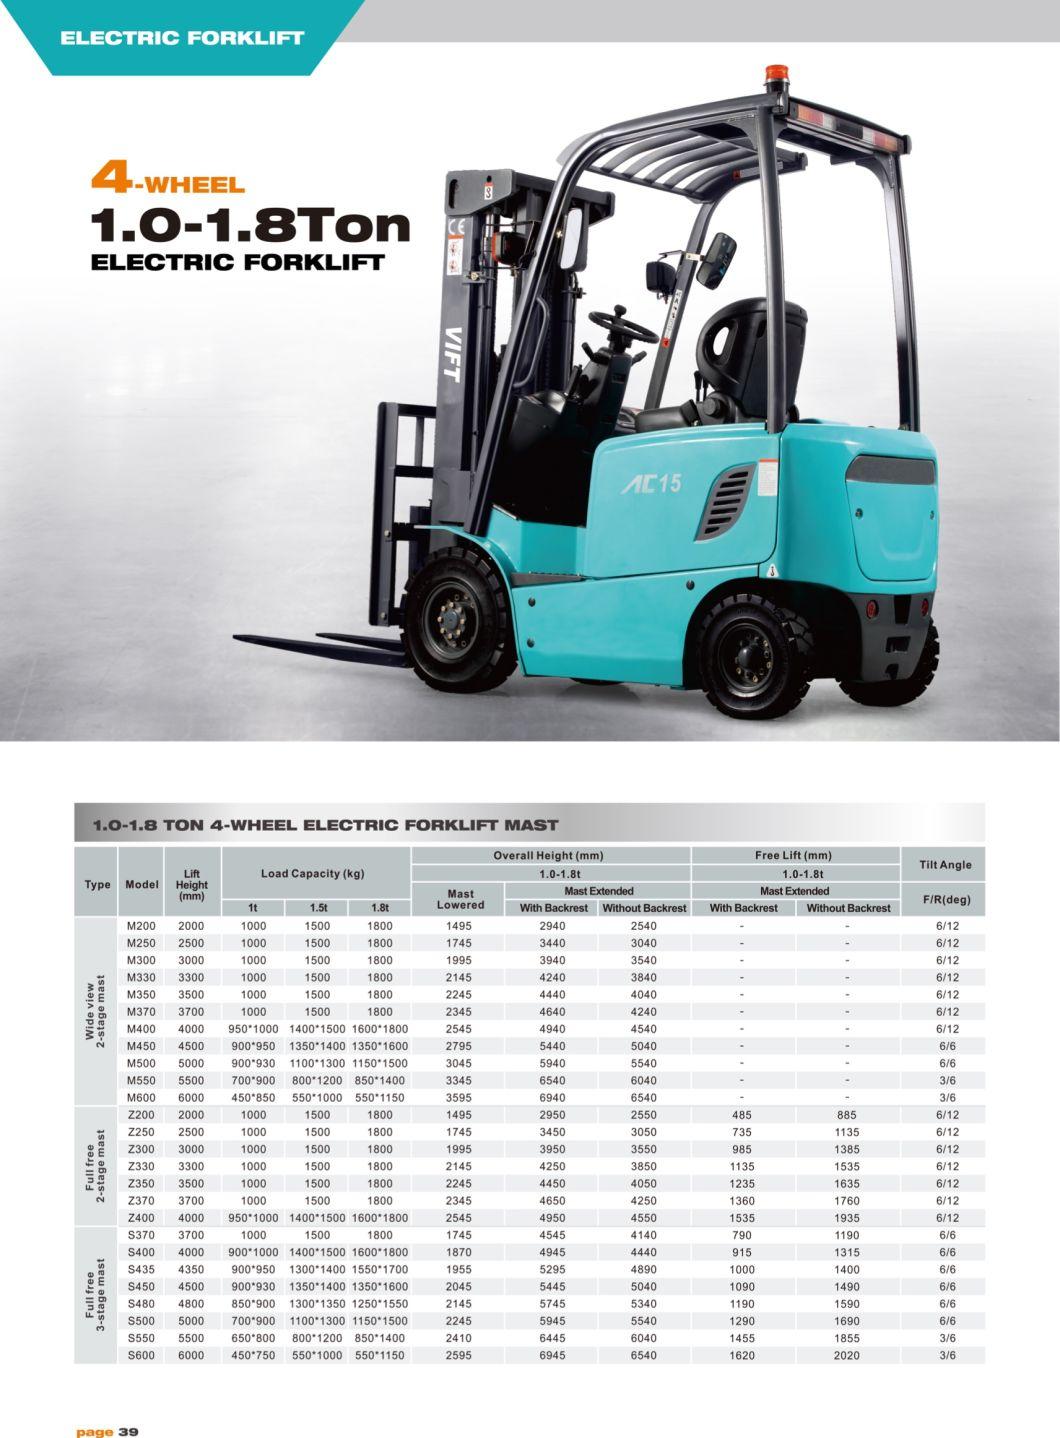 1.5 Ton Counter Balanced Electric Four-Wheel Forklift Truck